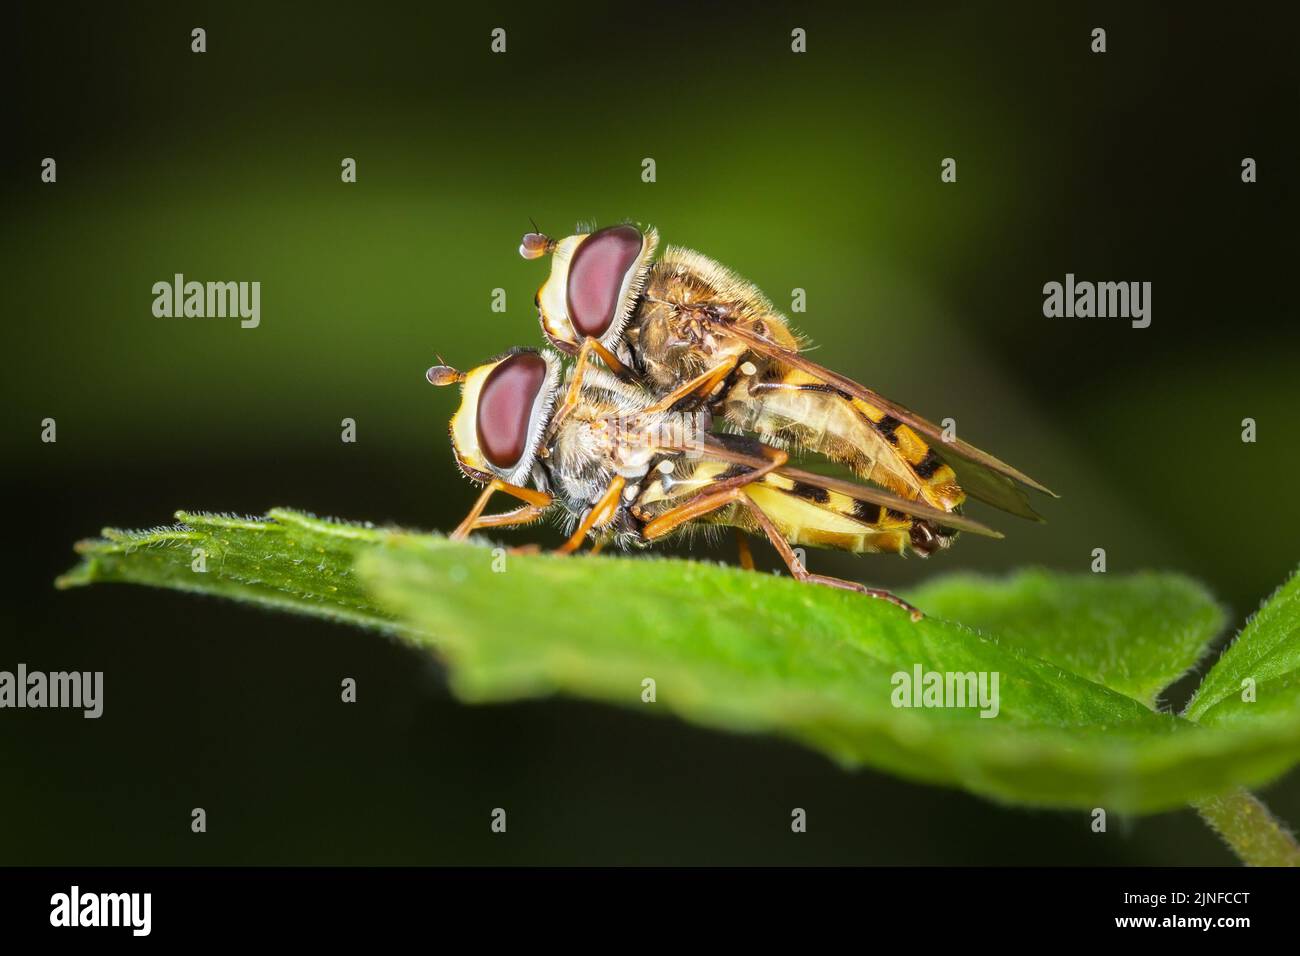 Two hoverfly flies are mating on a green leaf. Macro photography. Stock Photo